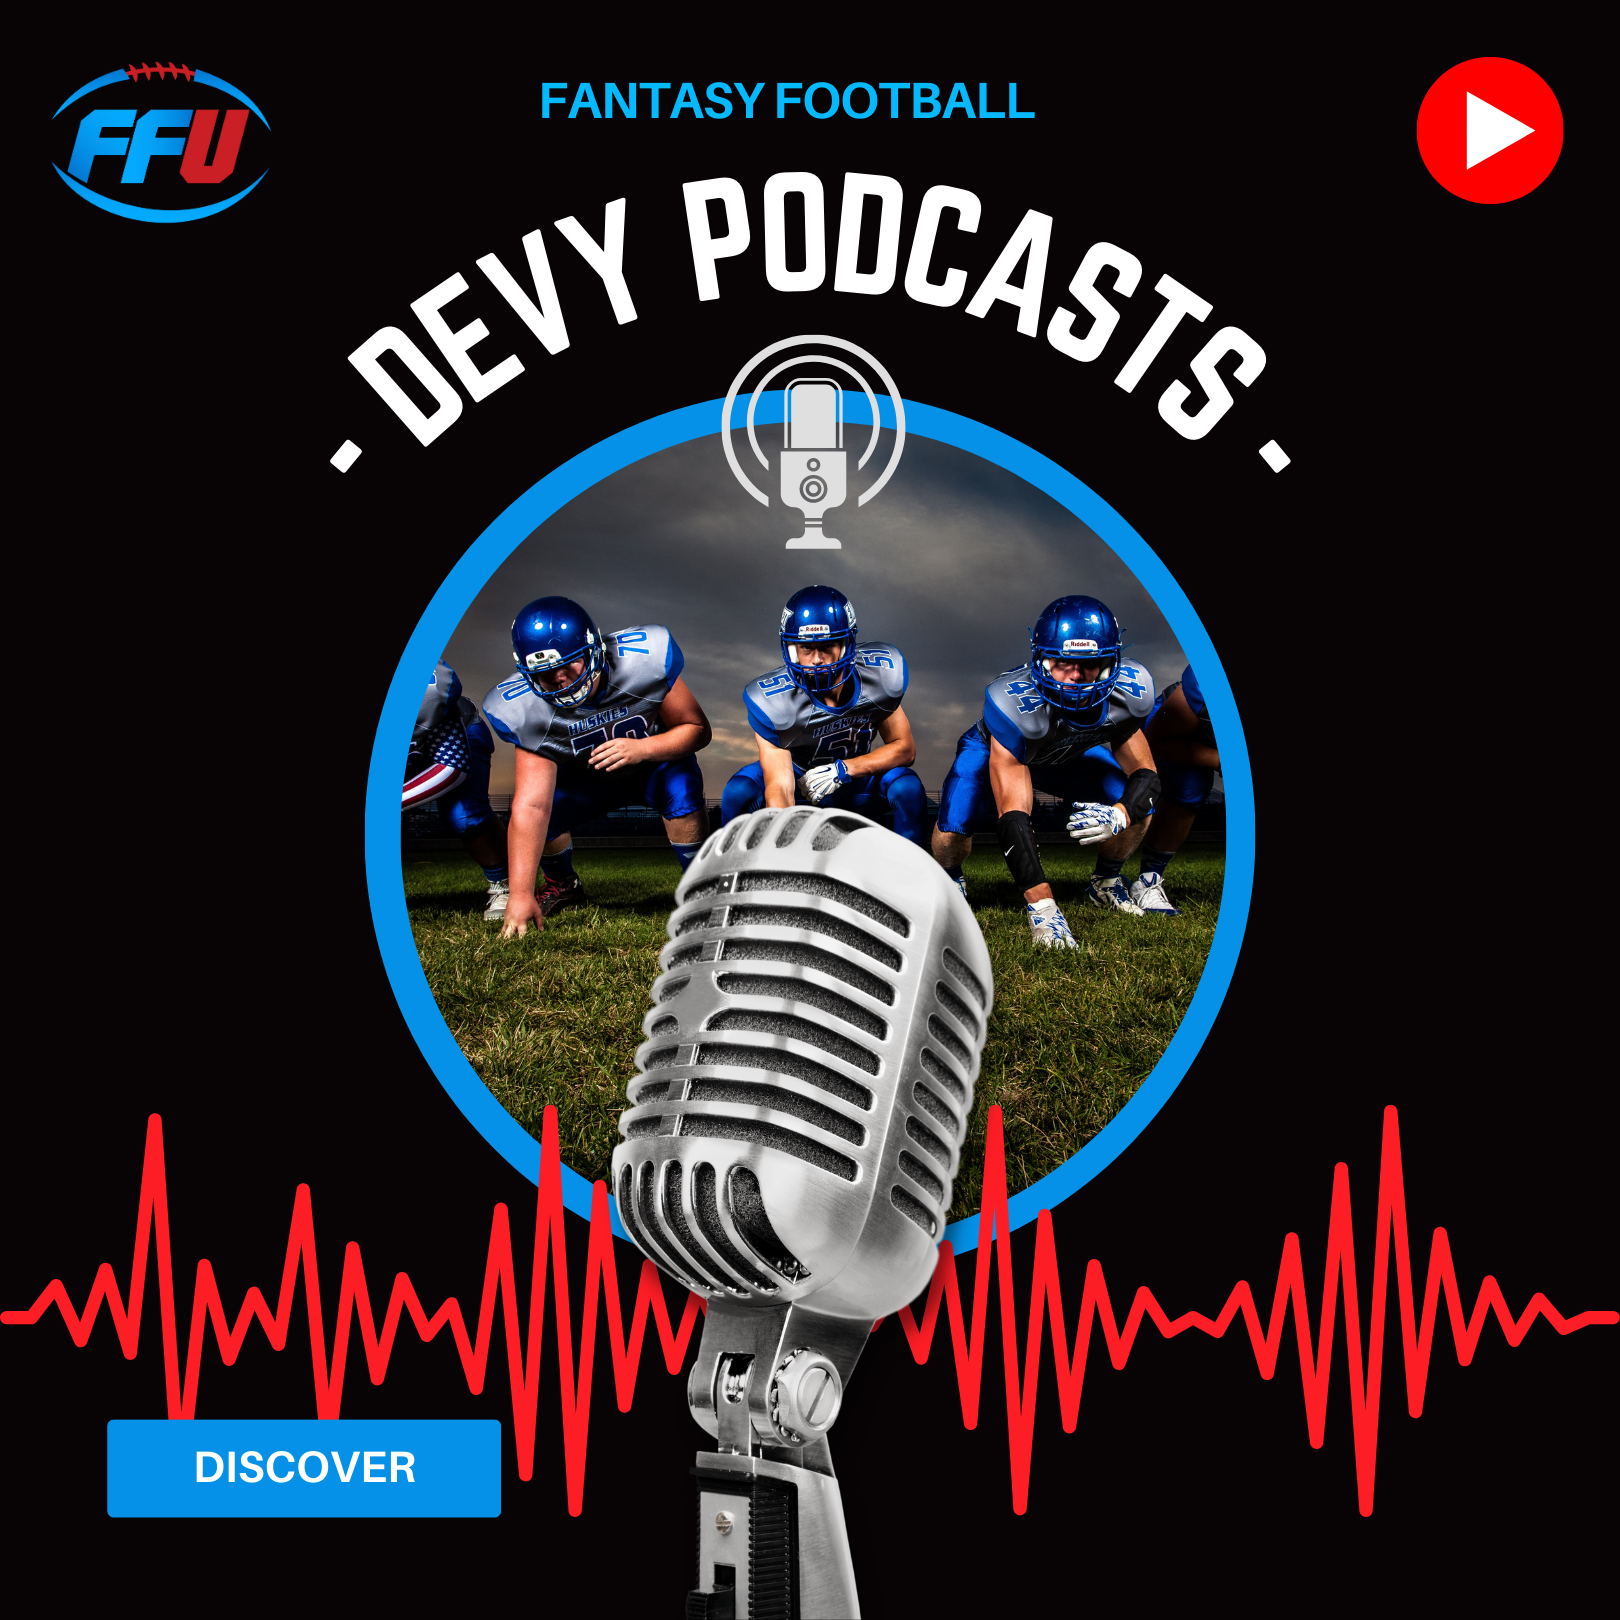 DEVY PODCASTS